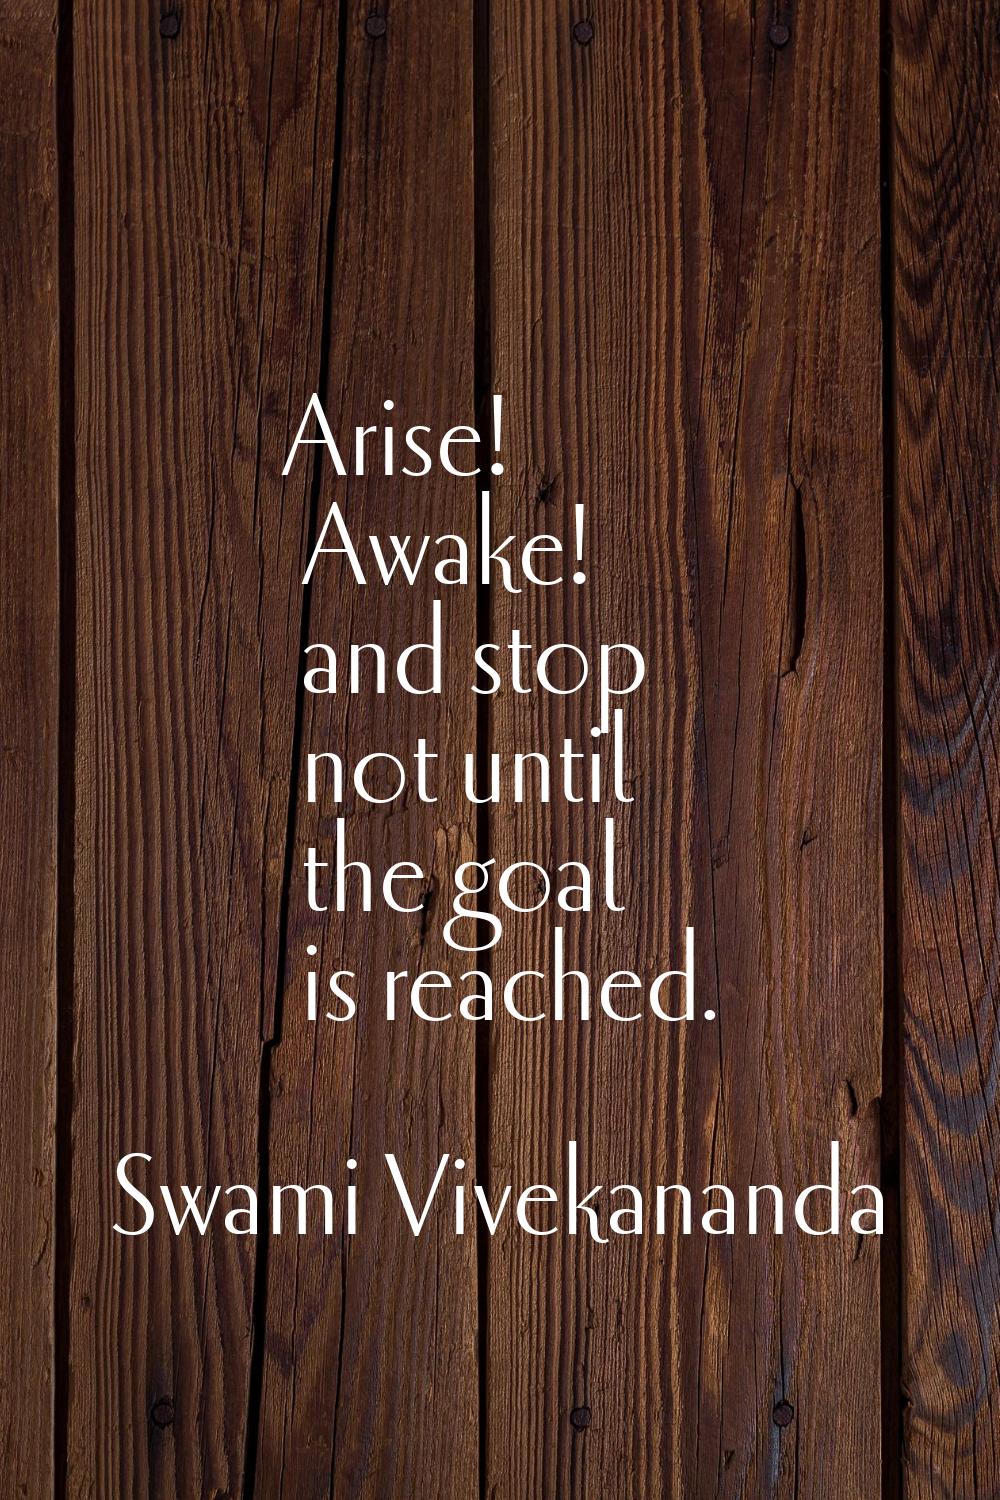 Arise! Awake! and stop not until the goal is reached.